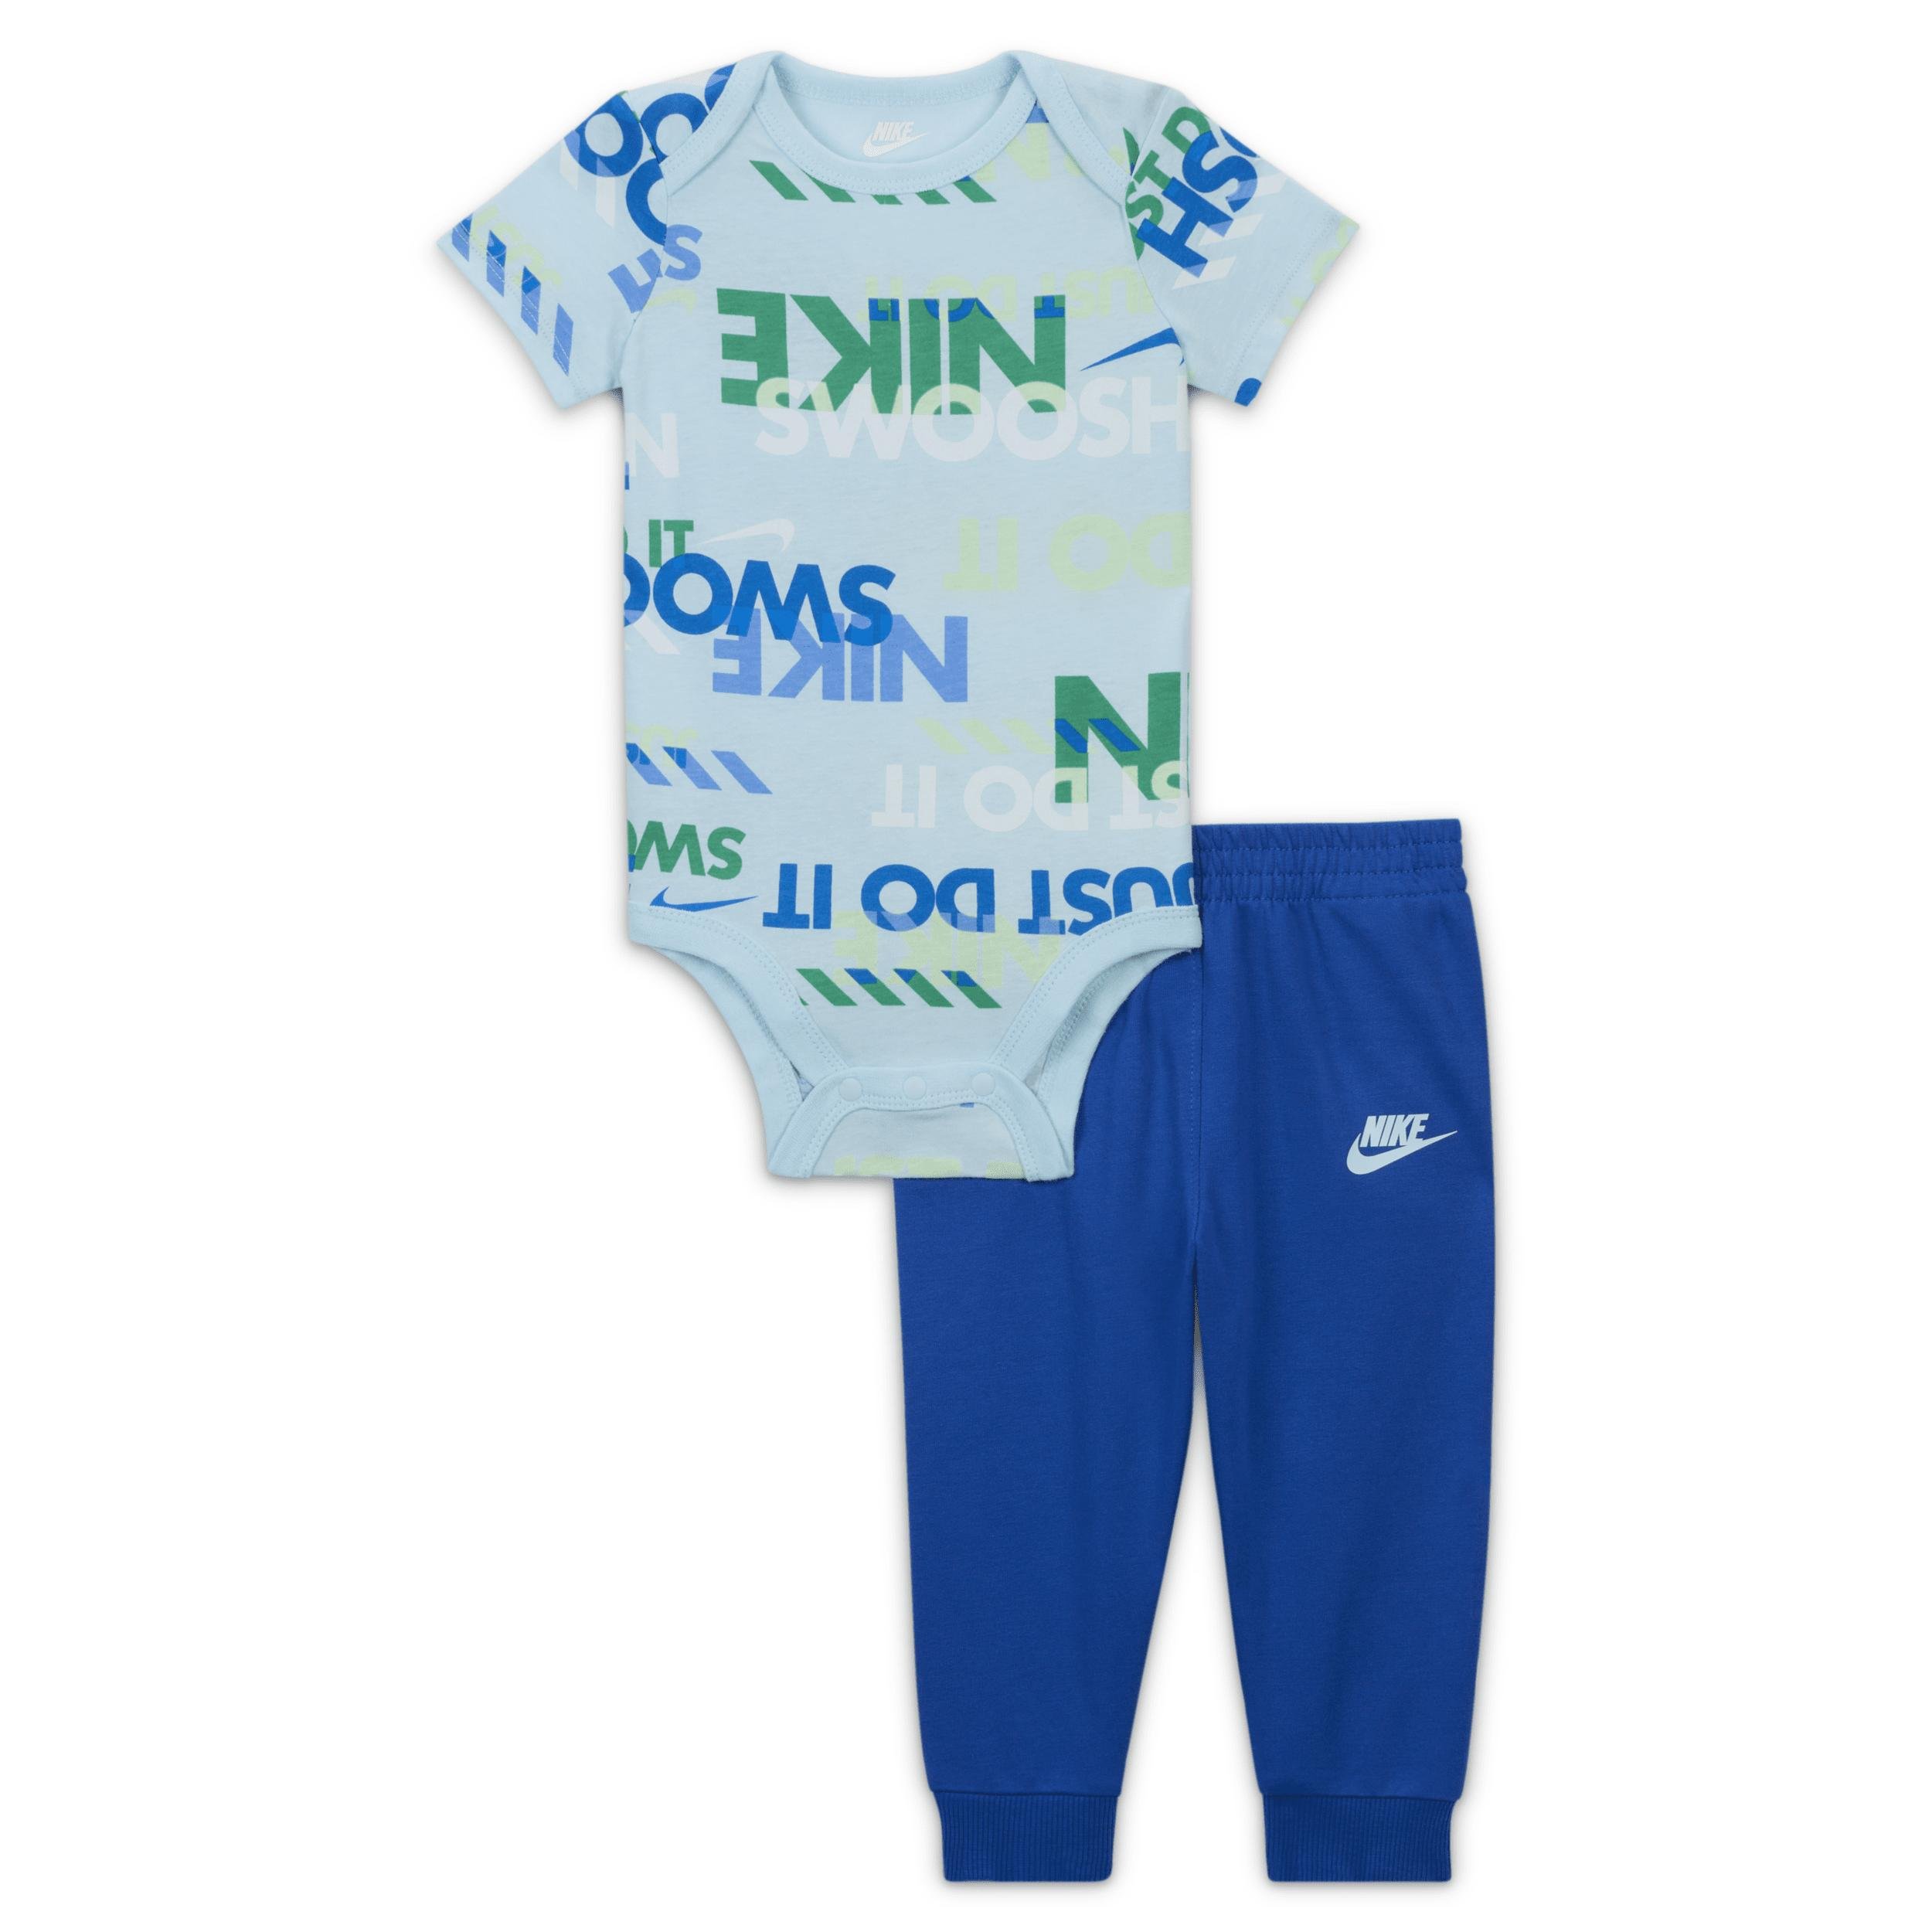 Nike Sportswear Playful Exploration Baby (0-9M) Printed Bodysuit and Pants Set by NIKE